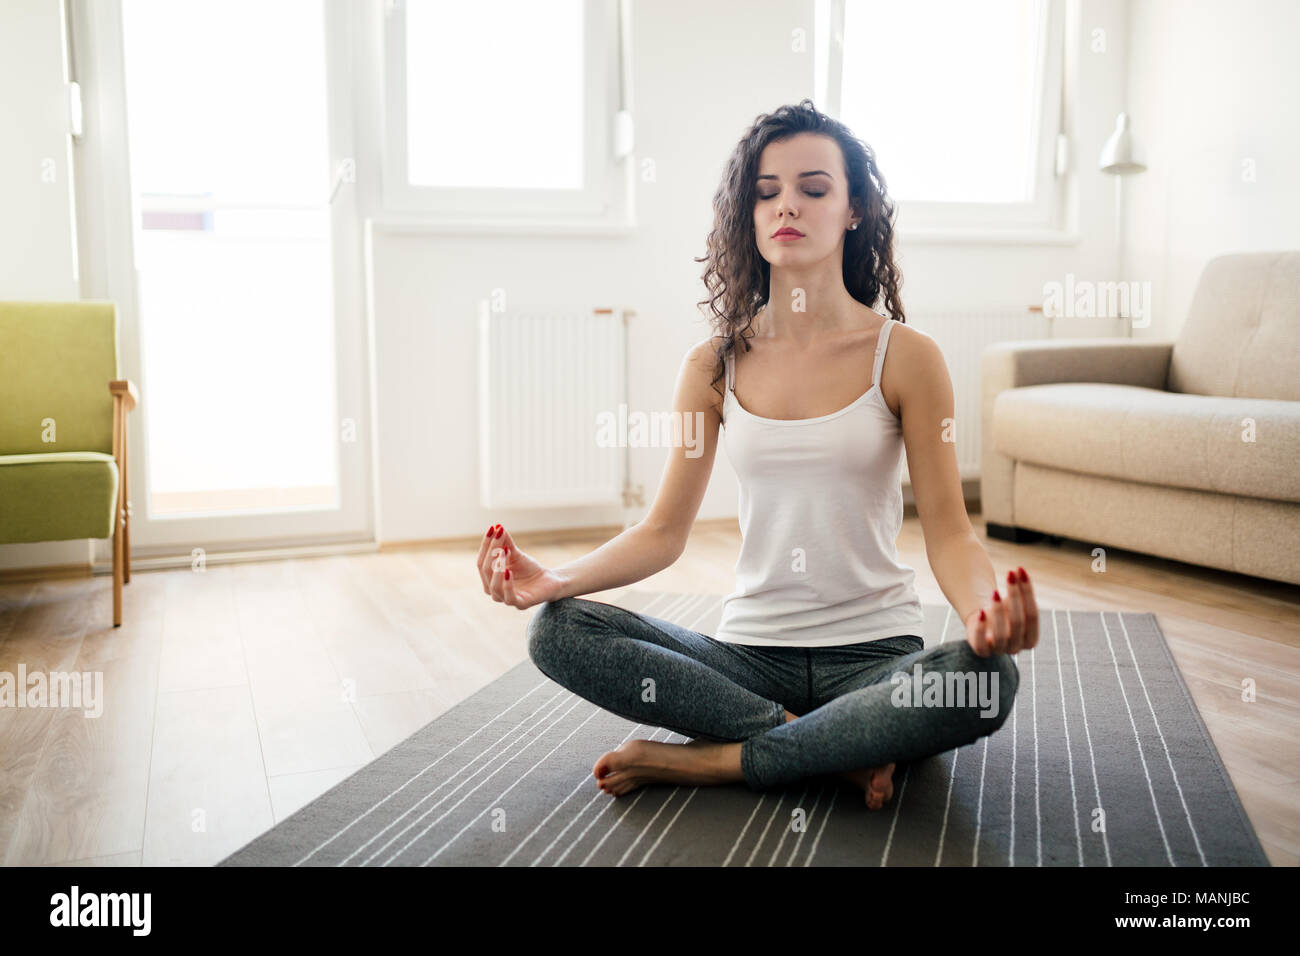 Young attractive woman practicing yoga et relaxation Banque D'Images